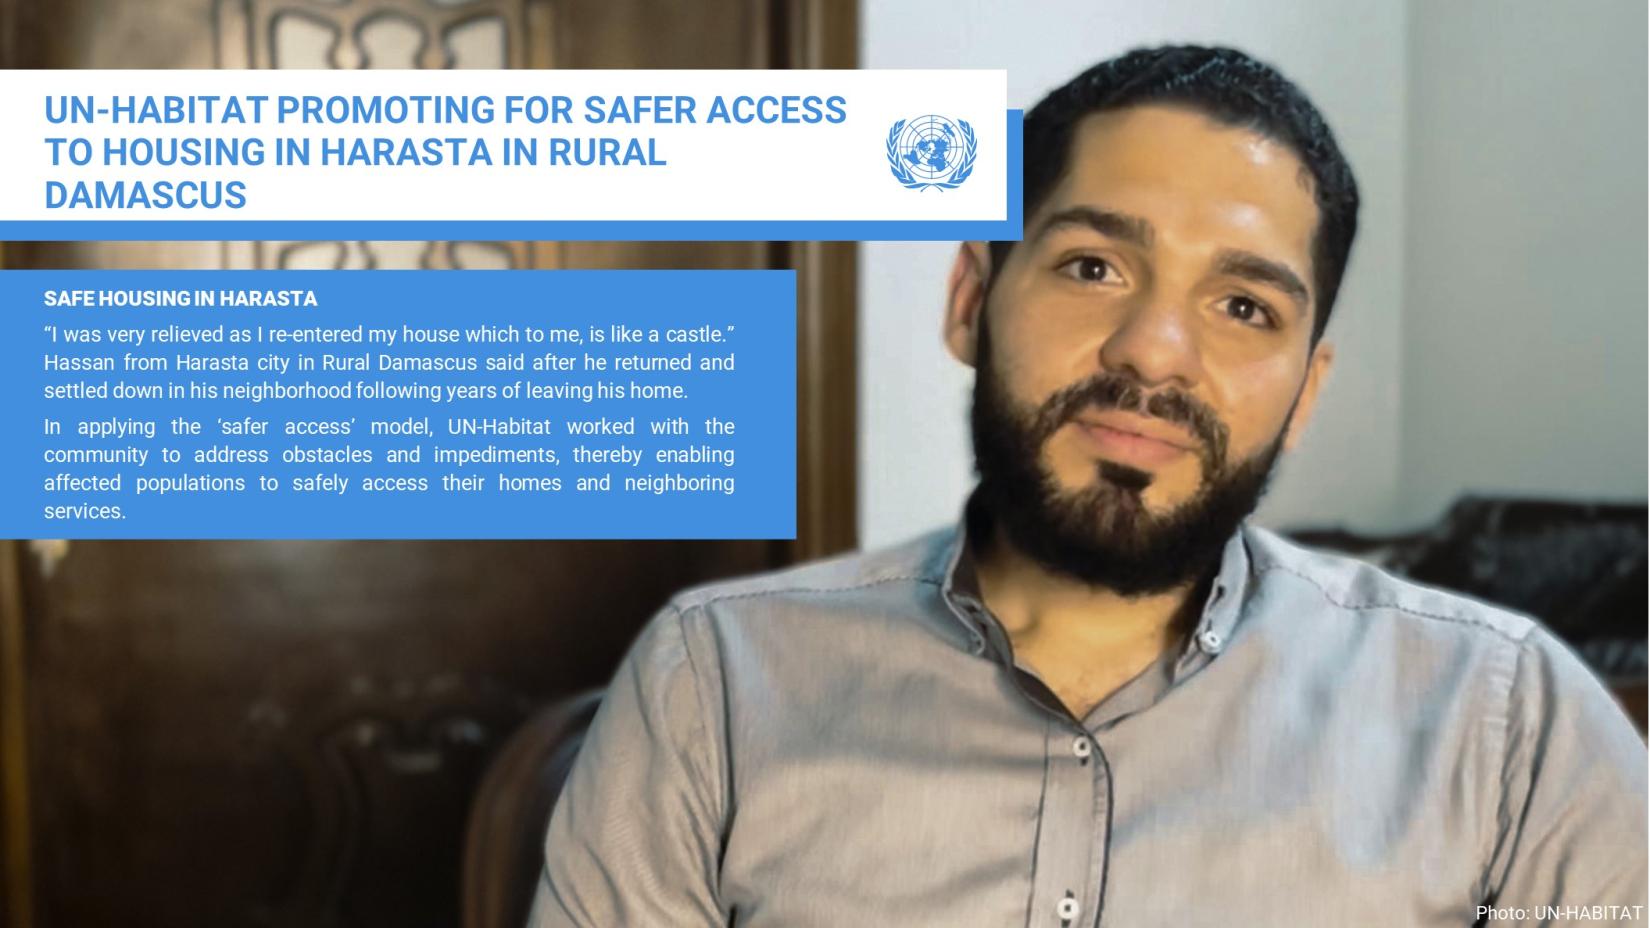 UN-HABITAT PROMOTING FOR SAFER ACCESS TO HOUSING IN HARASTA IN RURAL DAMASCUS